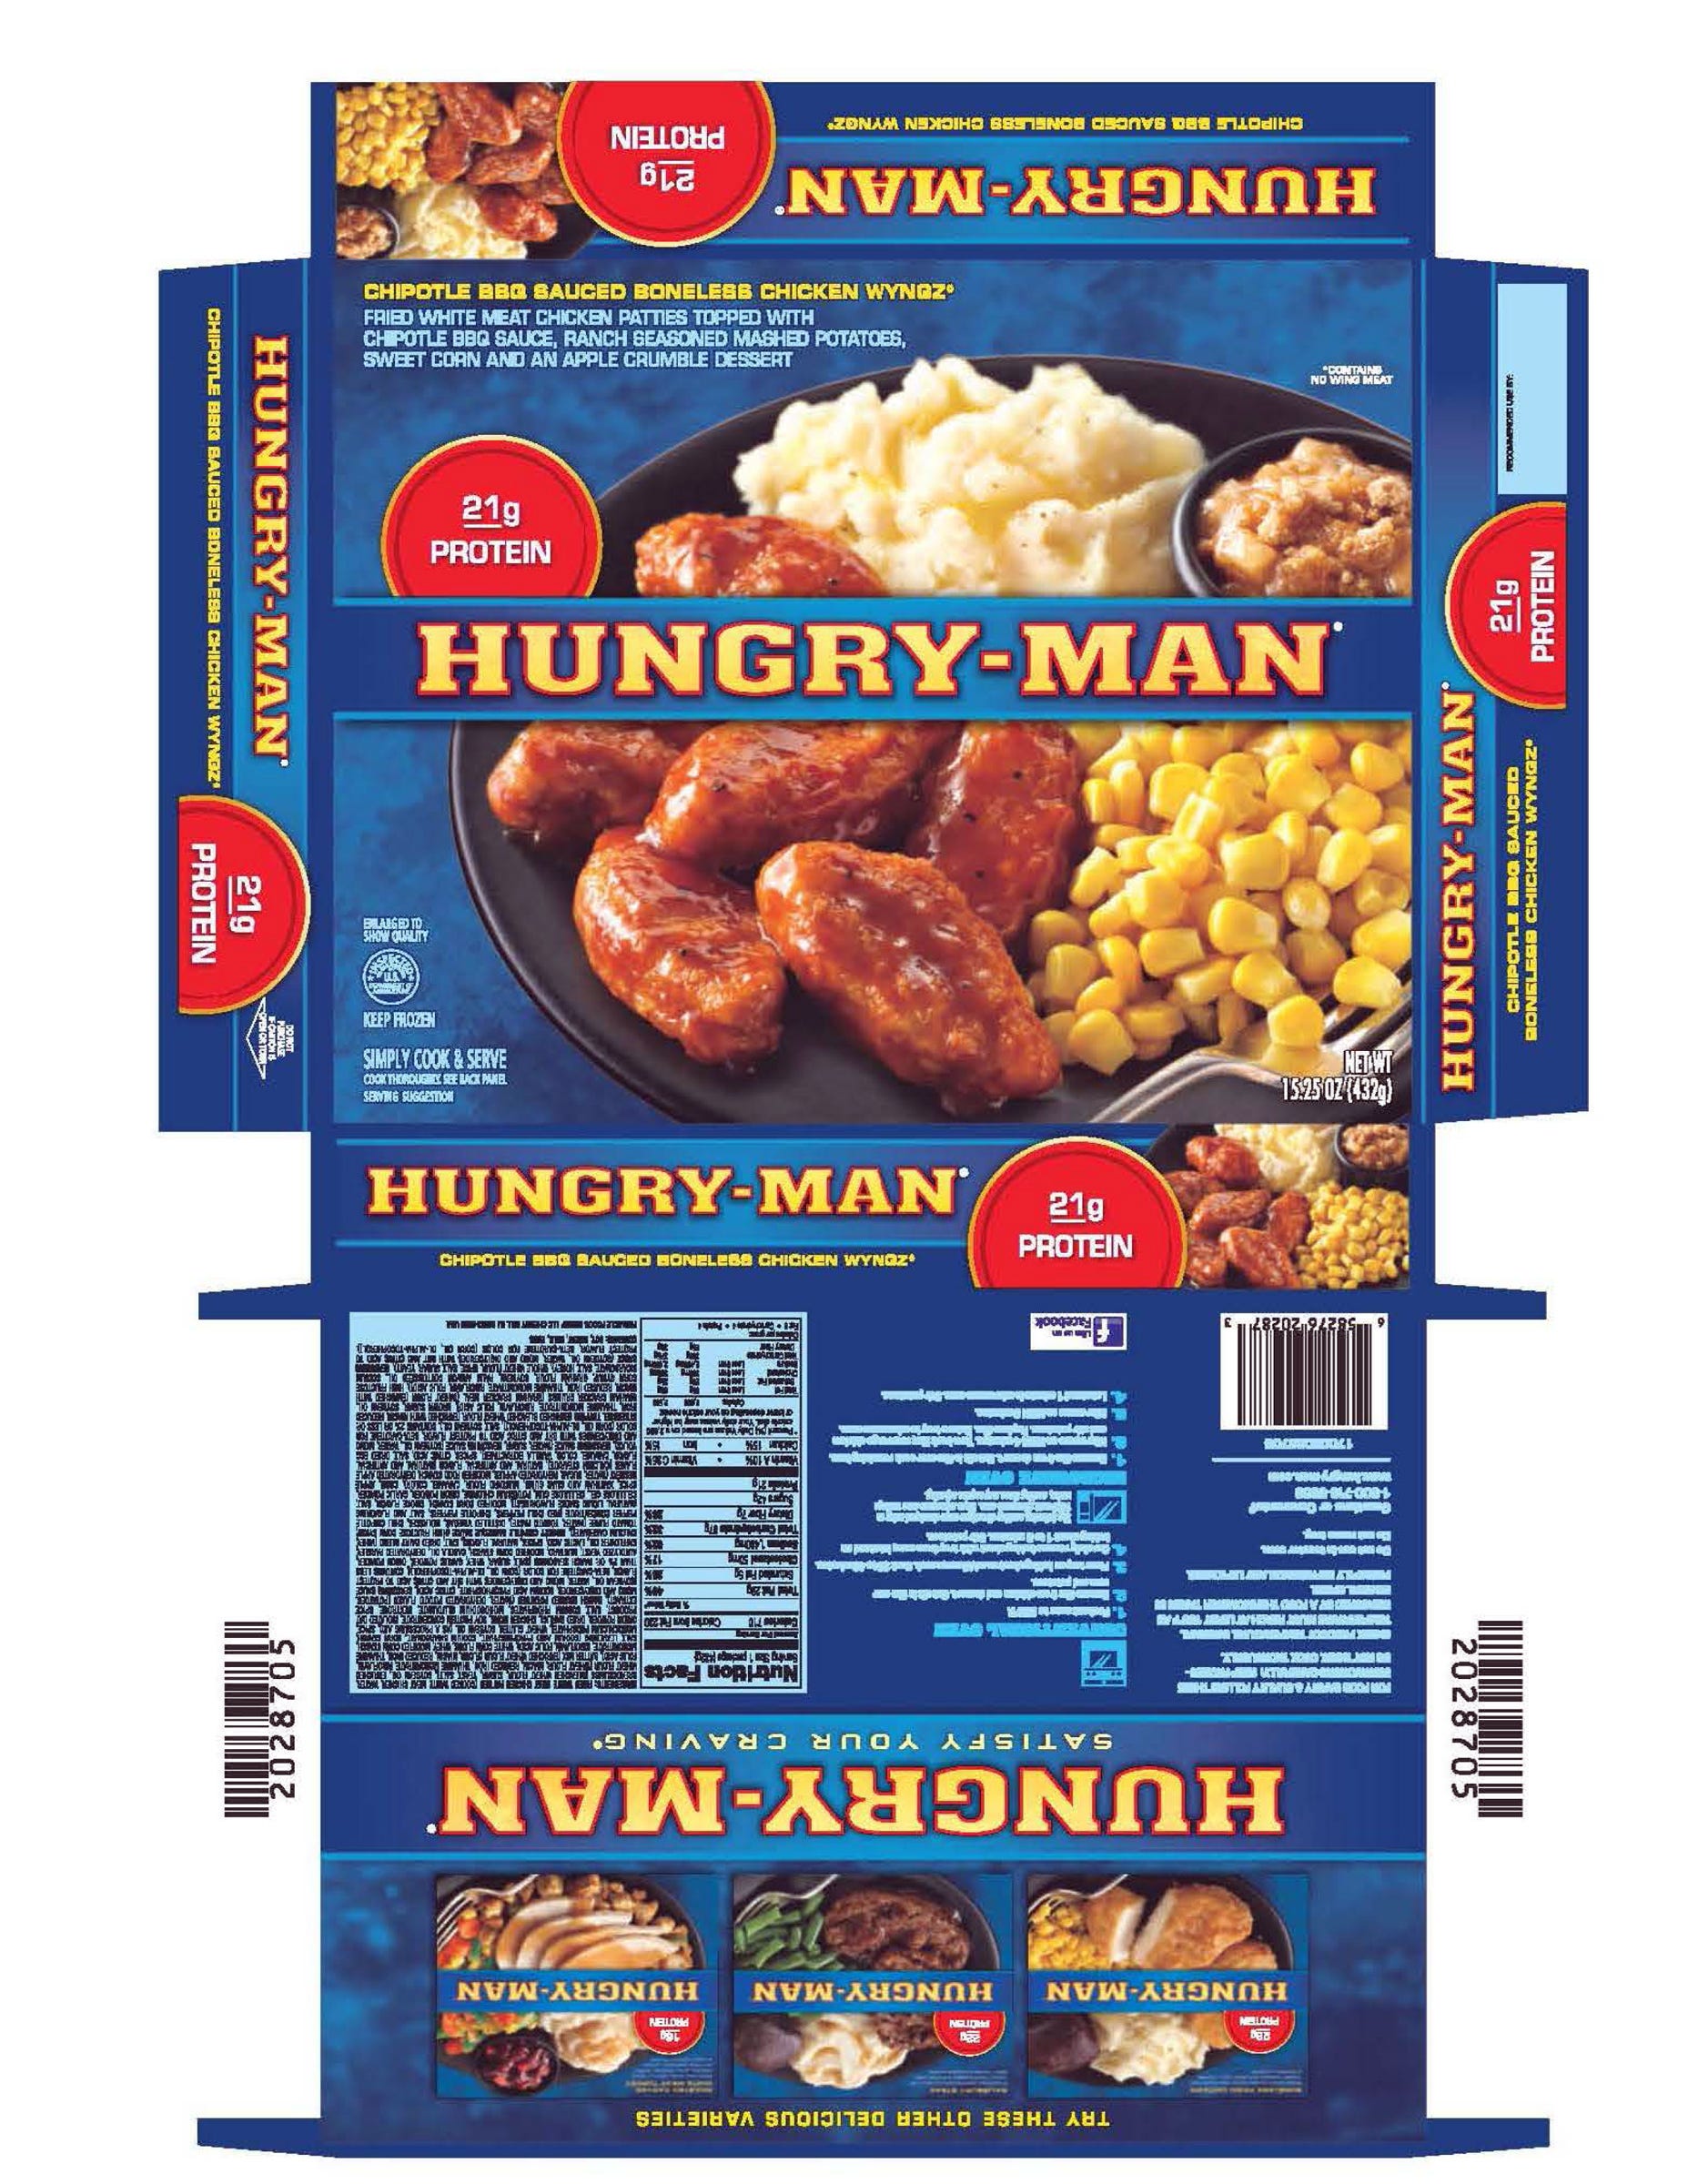 Recalled because of possible Salmonella contamination are 15.25-oz. individual frozen microwavable dinners with “HUNGRY MAN CHIPOTLE BBQ SAUCED BONELESS CHICKEN WYNGZ” printed on the label and bearing a best buy date of 9/6/19.